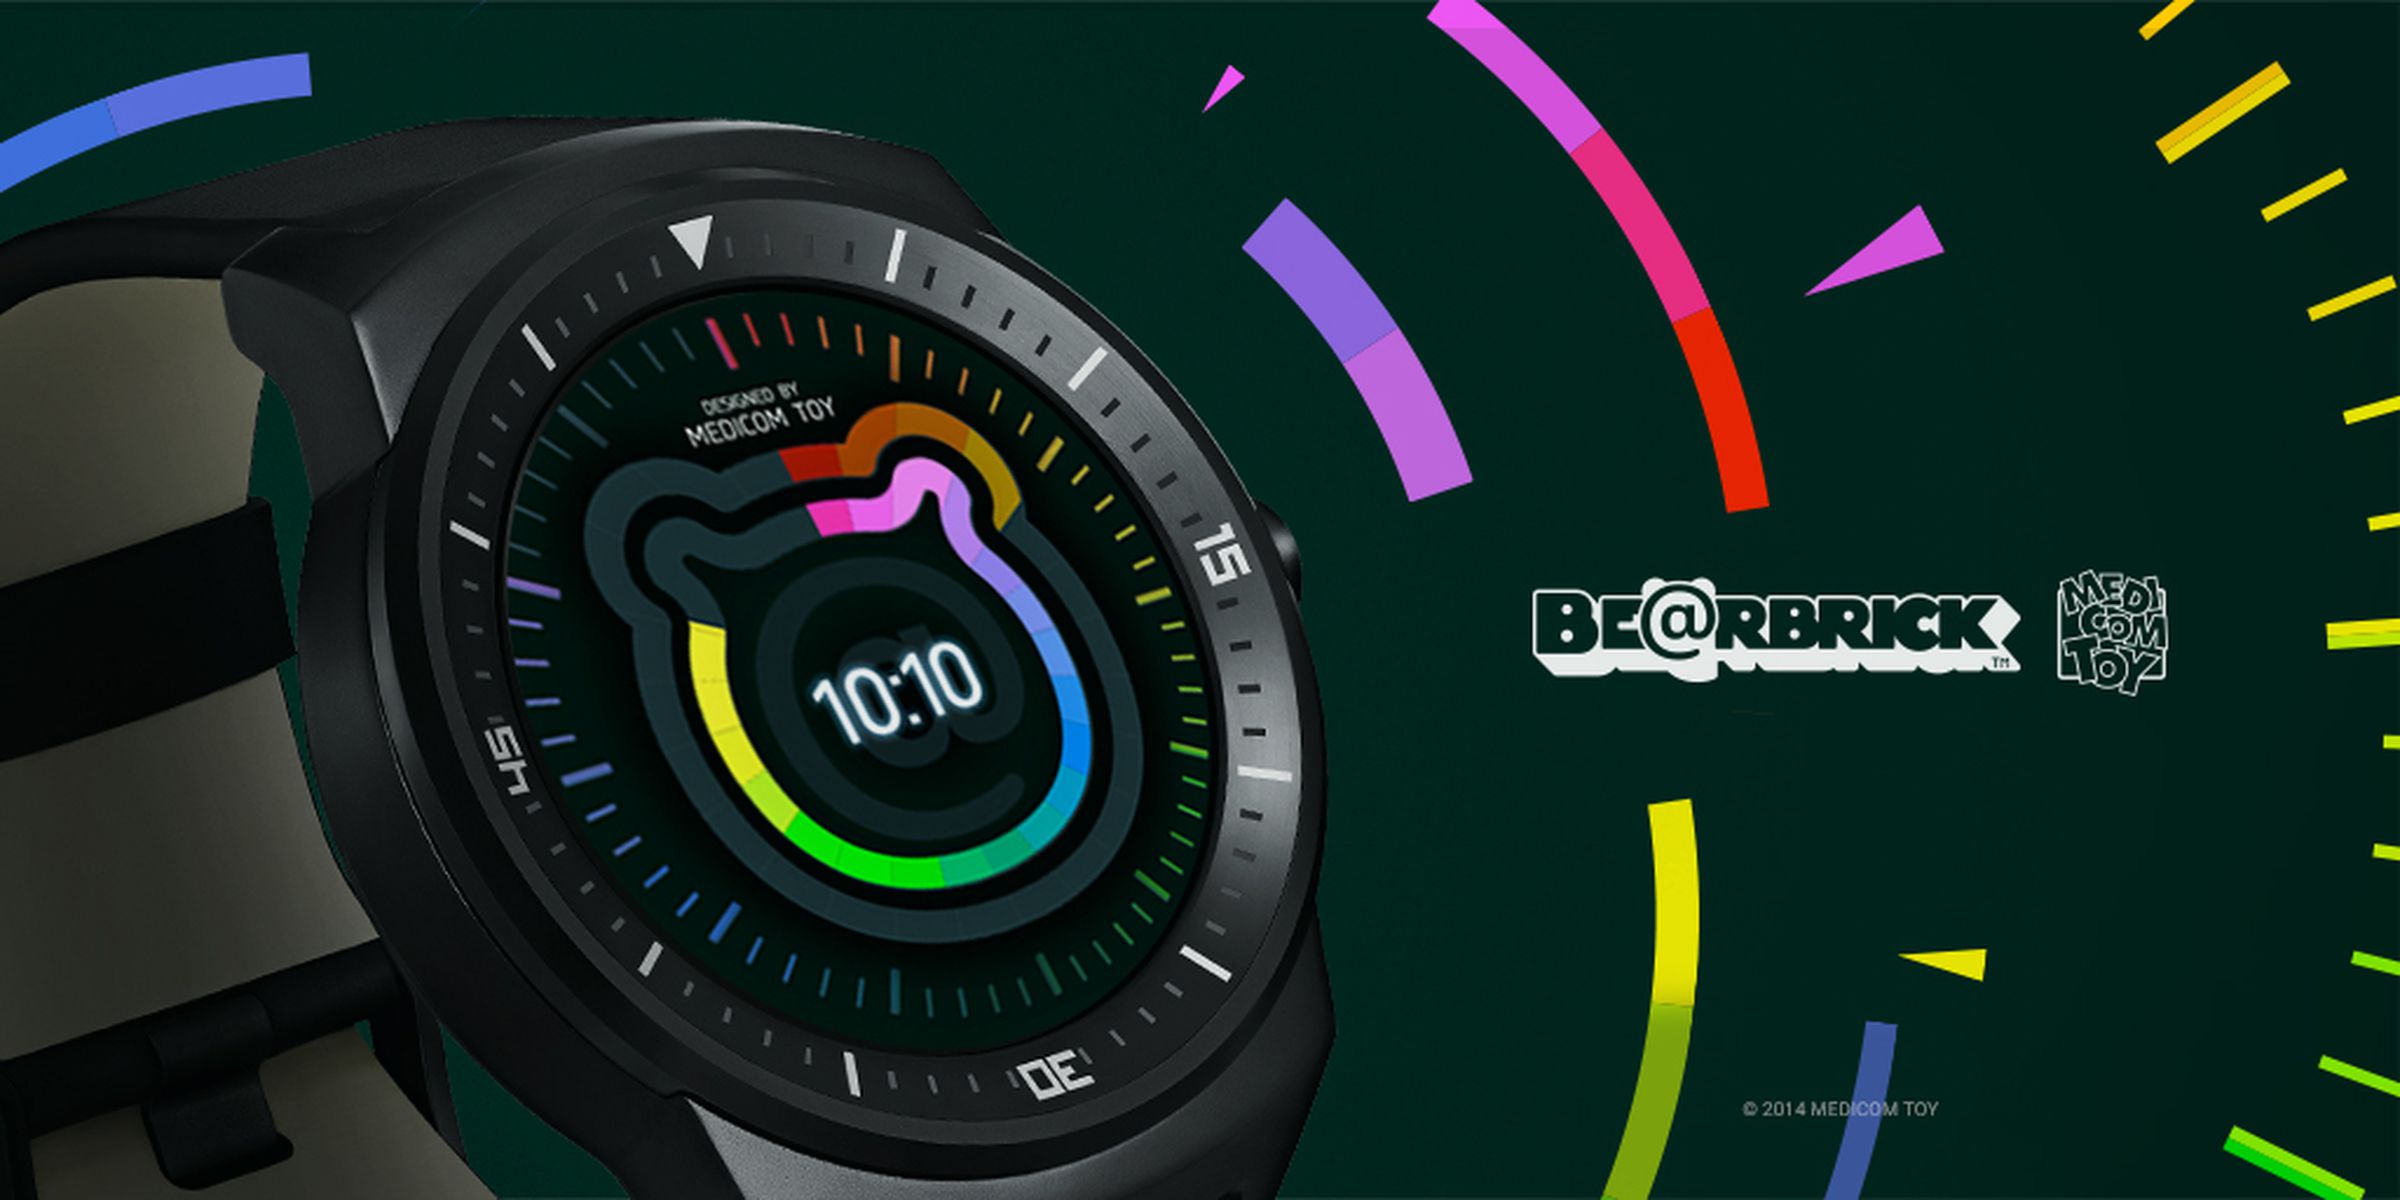 New Android Wear watch faces